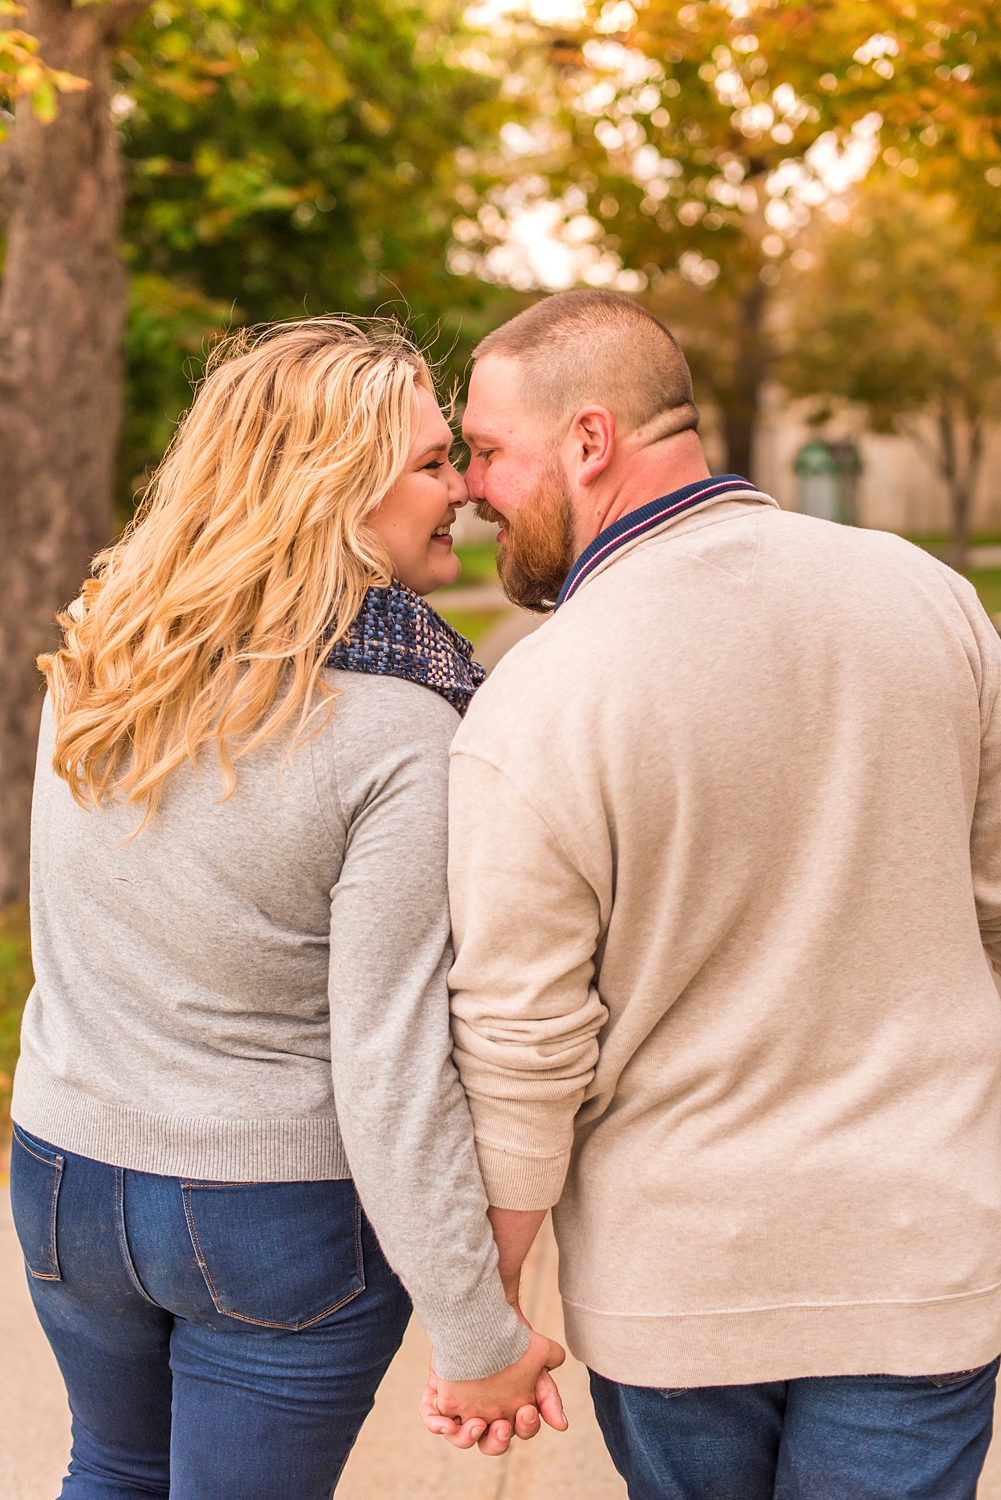 New Hampshire couple lean in together during fall engagement photos